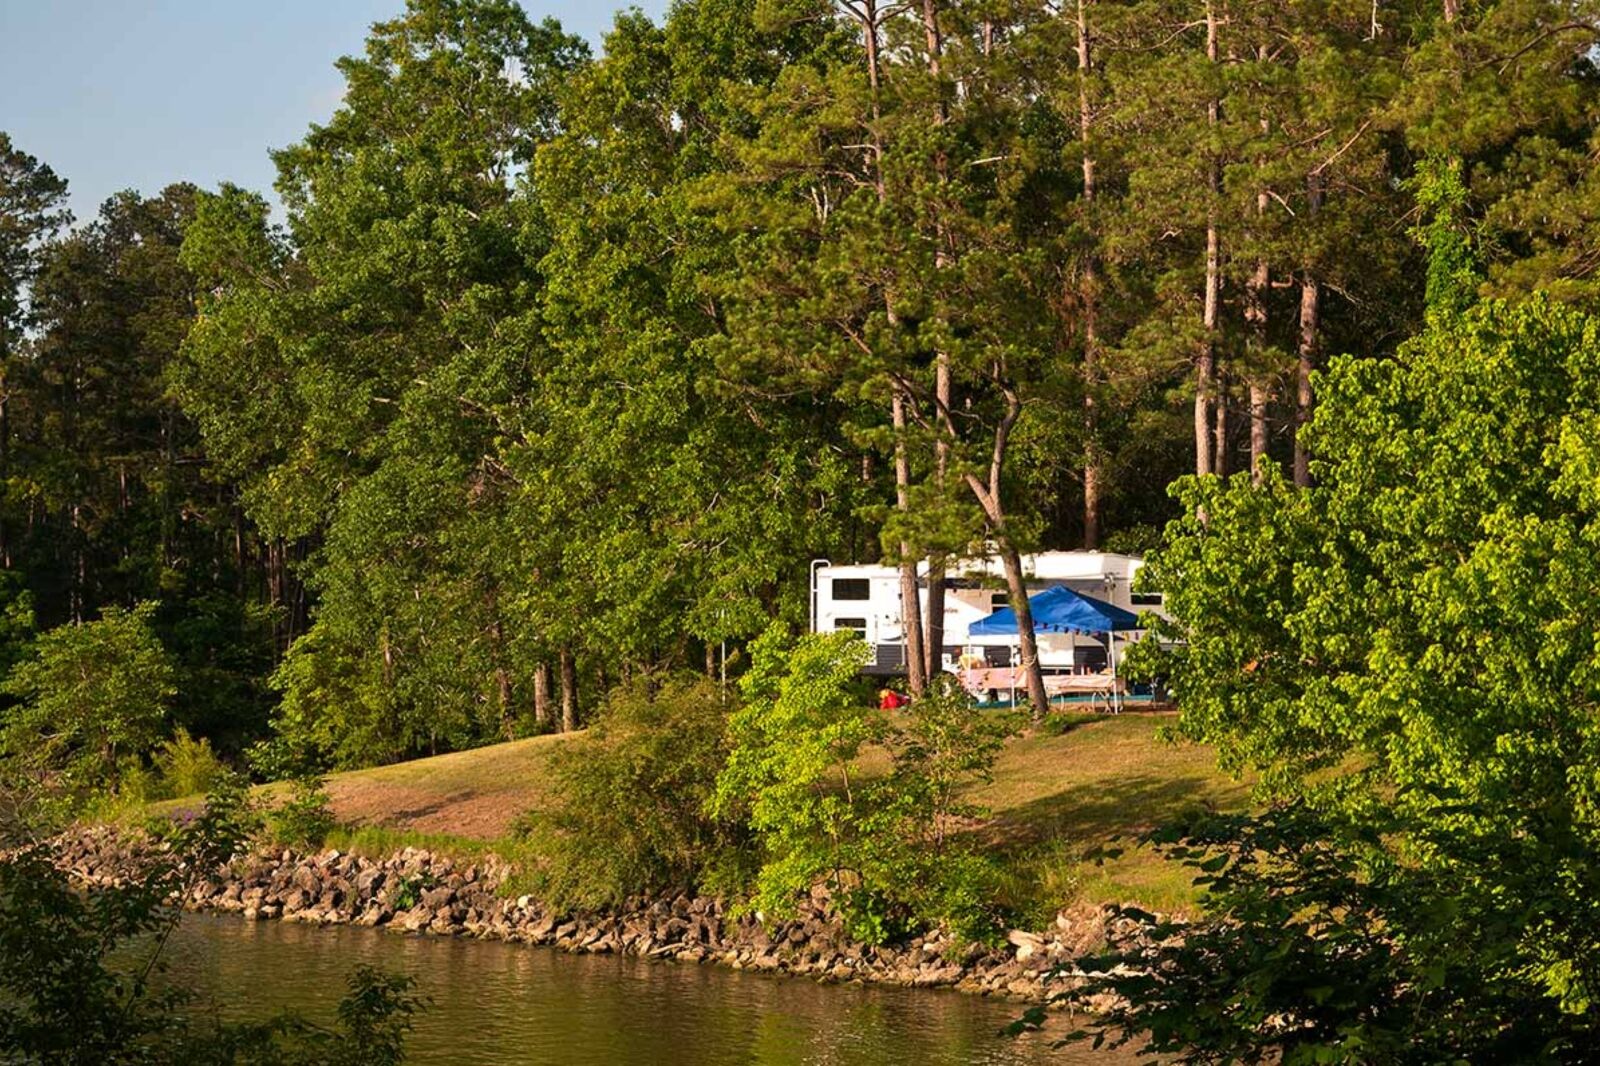 Campsite by Lake Livingston one of the best places for camping in Houston